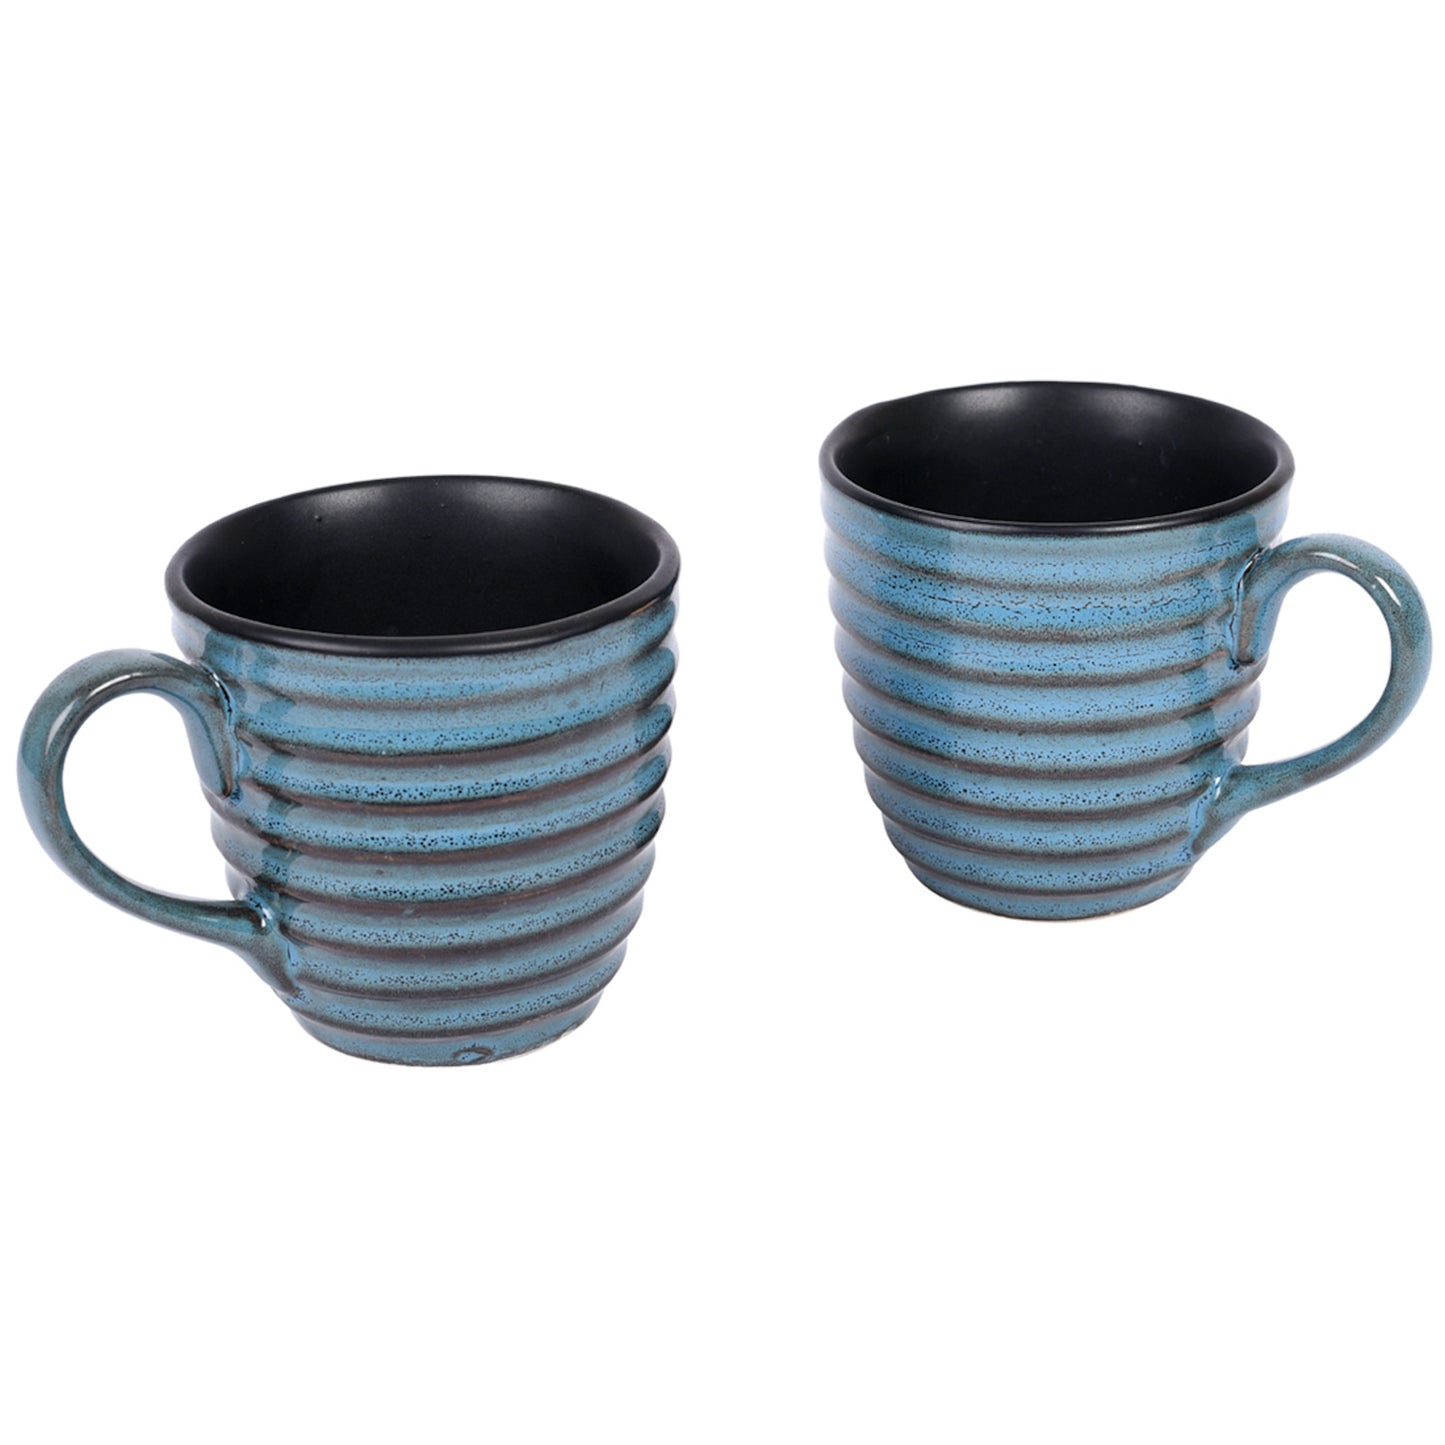 Cup Holder Handcrafted & 2 Mugs (Set of 3) (7x3.3x7)